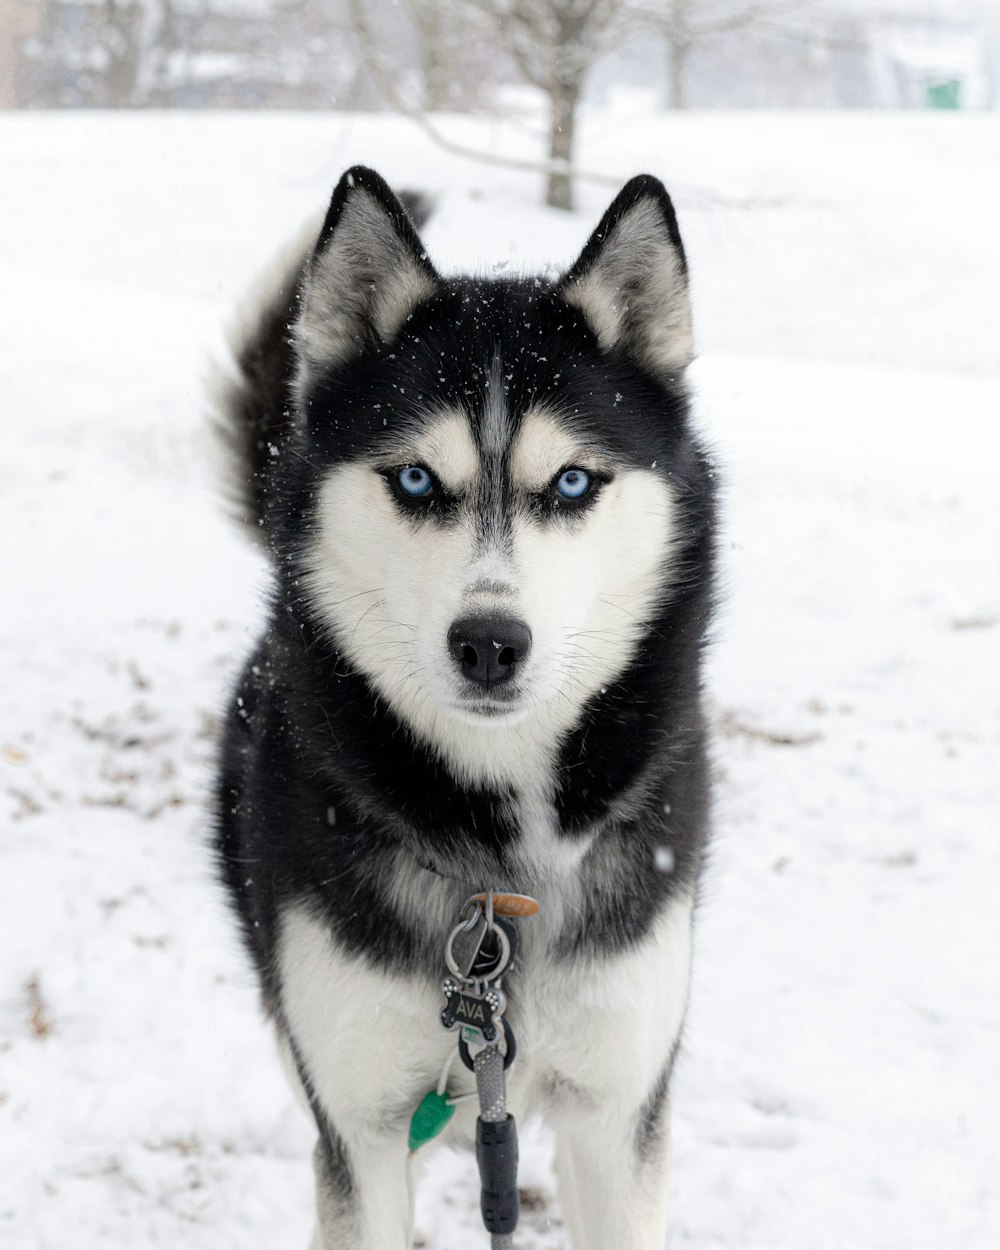 a husky dog with blue eyes standing in the snow